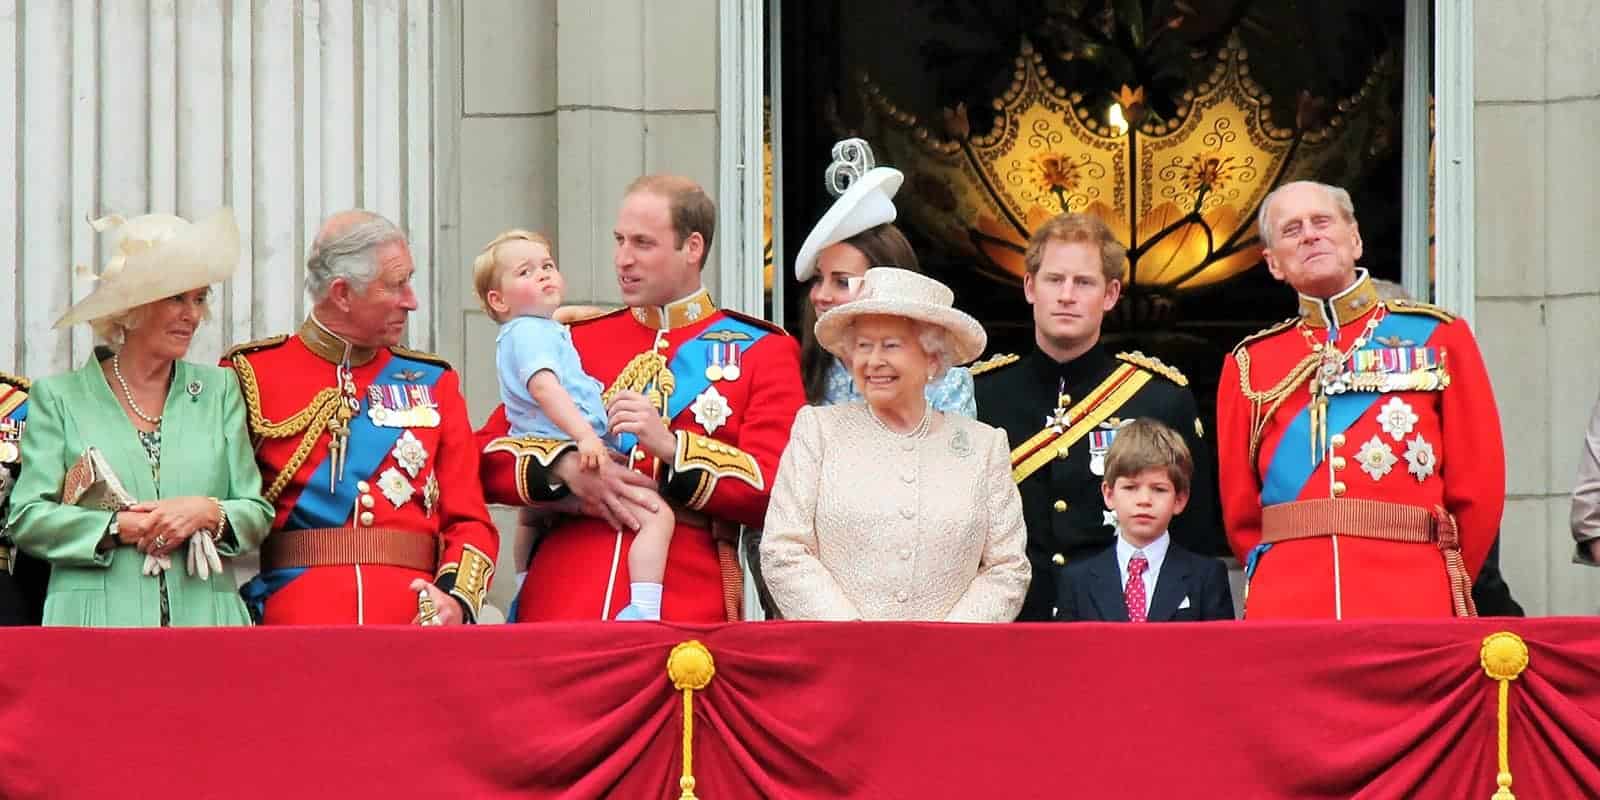 Queen Elizabeth II on a balcony surrounded by other members of the Royal Family of Britain.